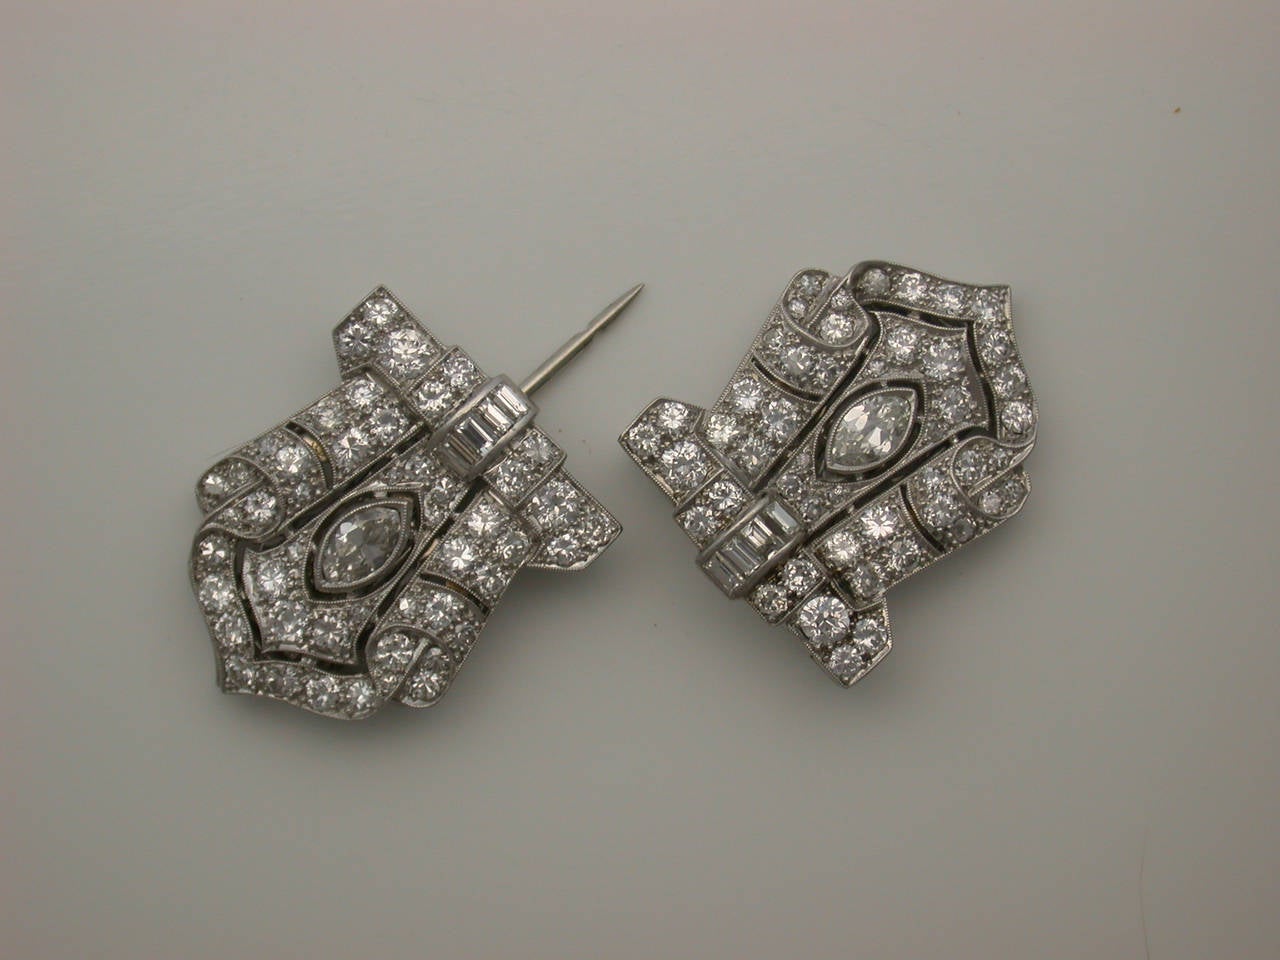 The elegant pair of dress clips (each measuring 1 inch high by 7/8 inch wide held vertically) set with marquise, baguette and circular-cut white diamonds (approximately 4 carats total weight), mounted in platinum (26.2 g) designed in classic late